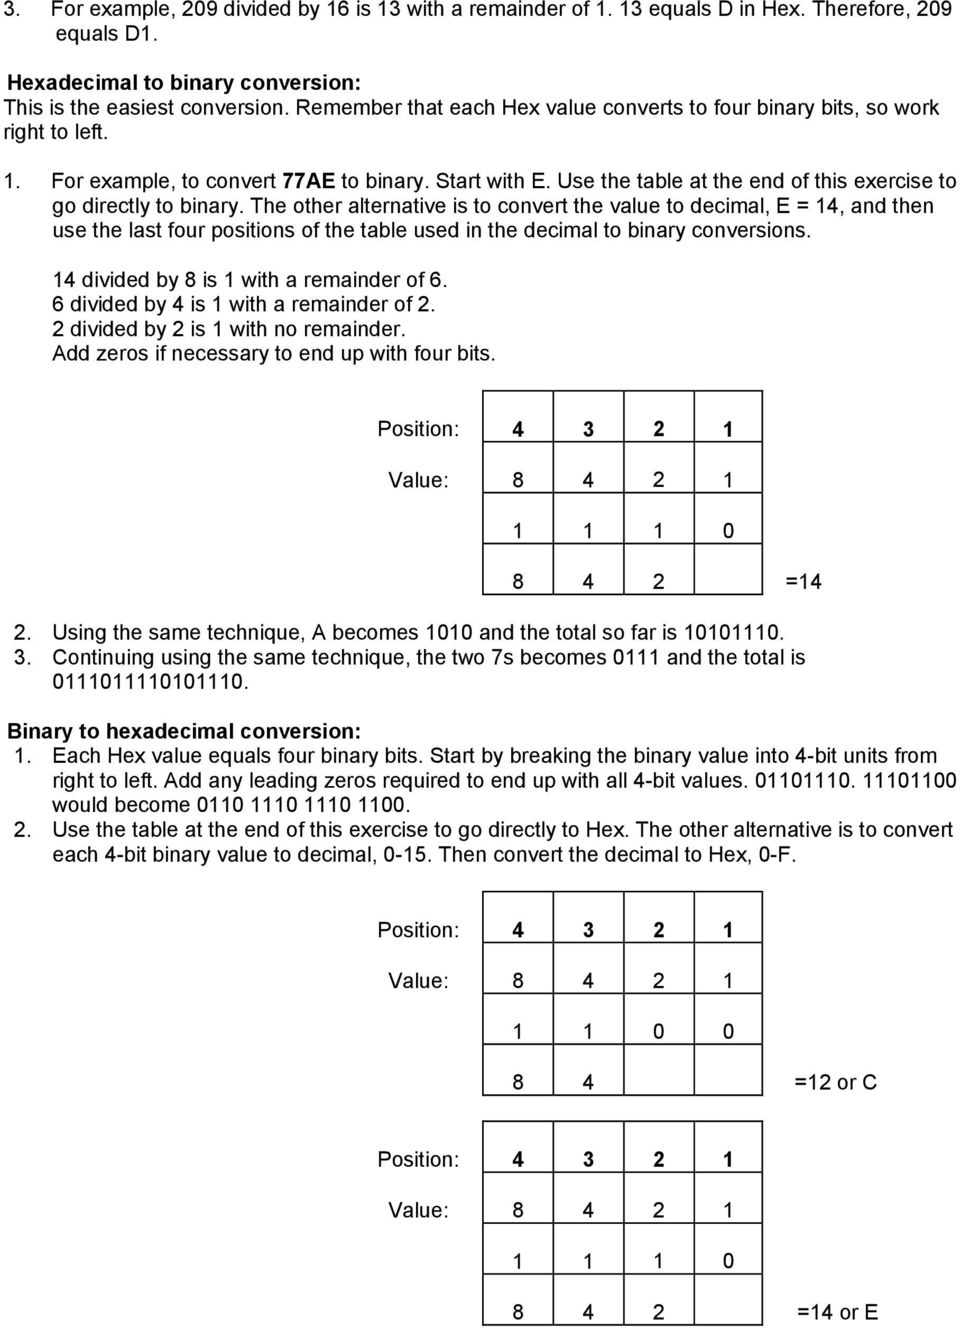 Use the table at the end of this exercise to go directly to binary.